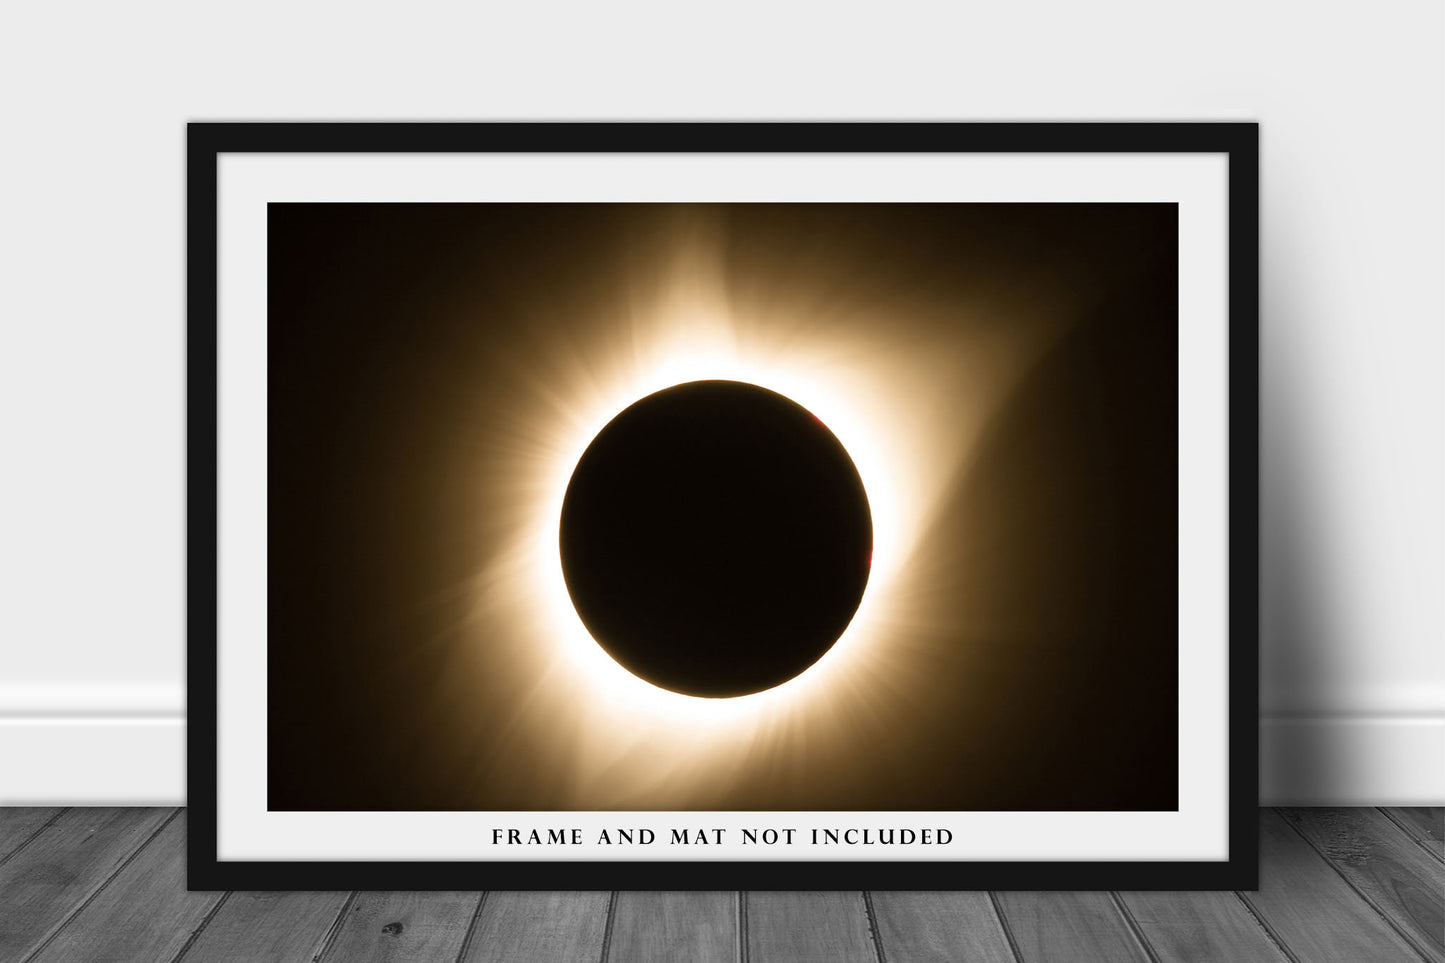 Celestial Photography Print (Not Framed) Picture of Total Solar Eclipse at Totality in Nebraska Sun Moon Wall Art Science Decor